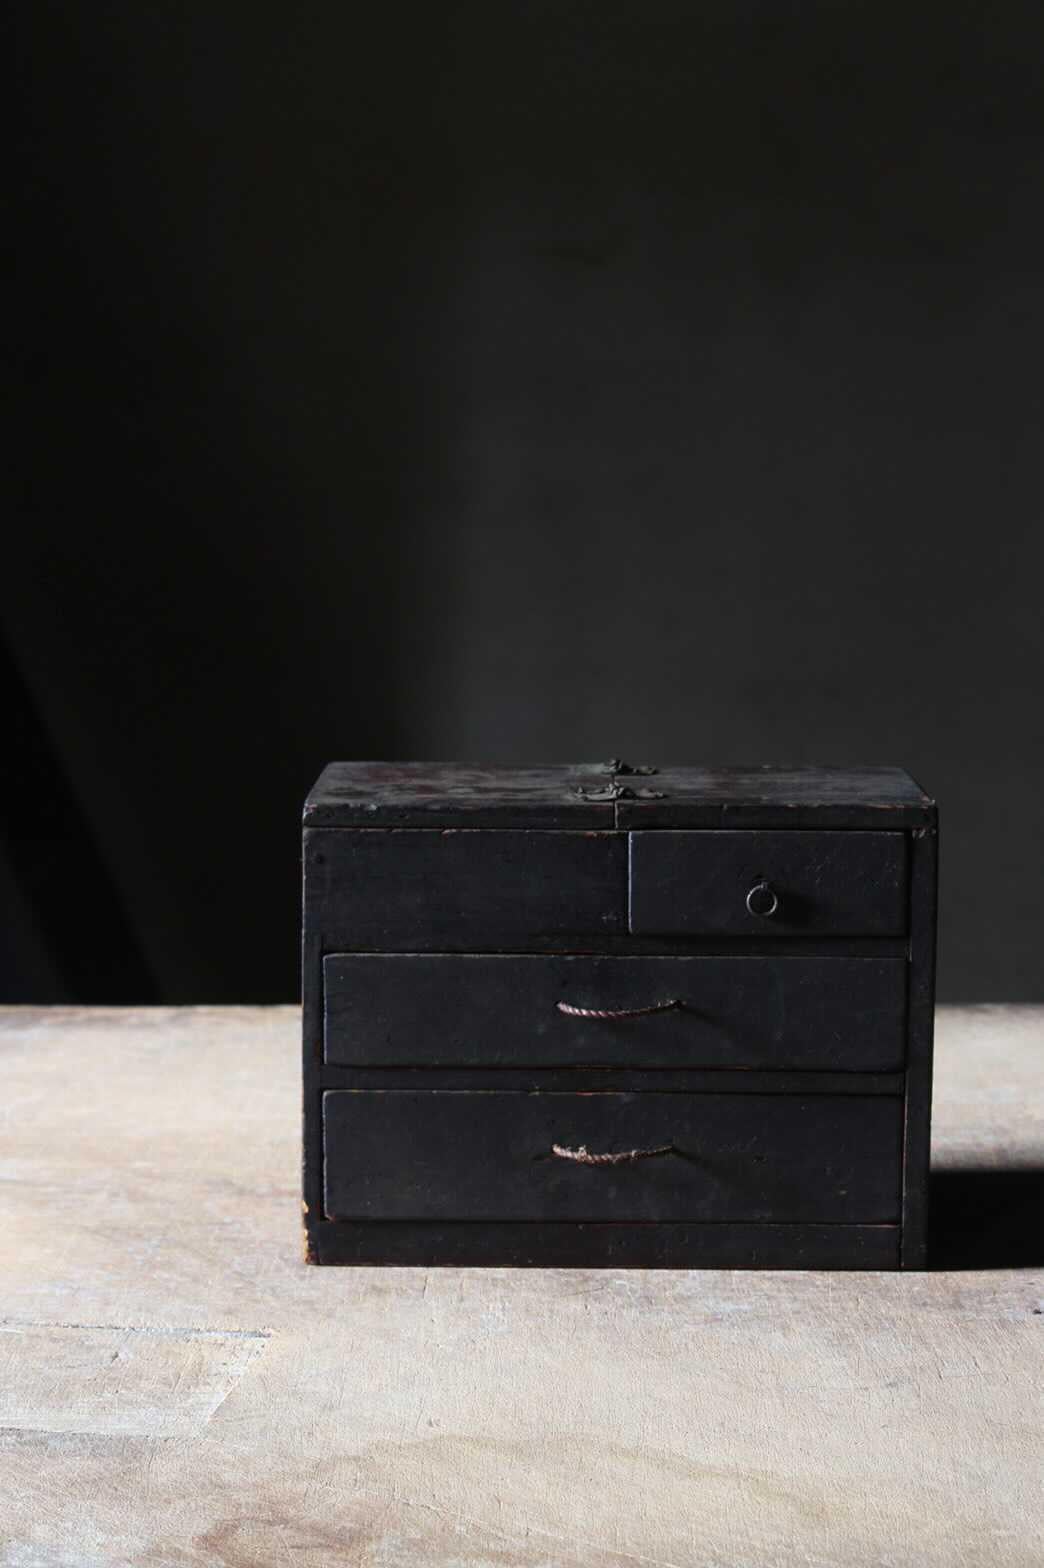 This is a beautifully worn late Edo period small chest of drawers for sewing. Made of Cedar with iron handle and hinge. The whole look is rustic, blackened and simple, with refined details like the top is foldable with a candle holder revealed at